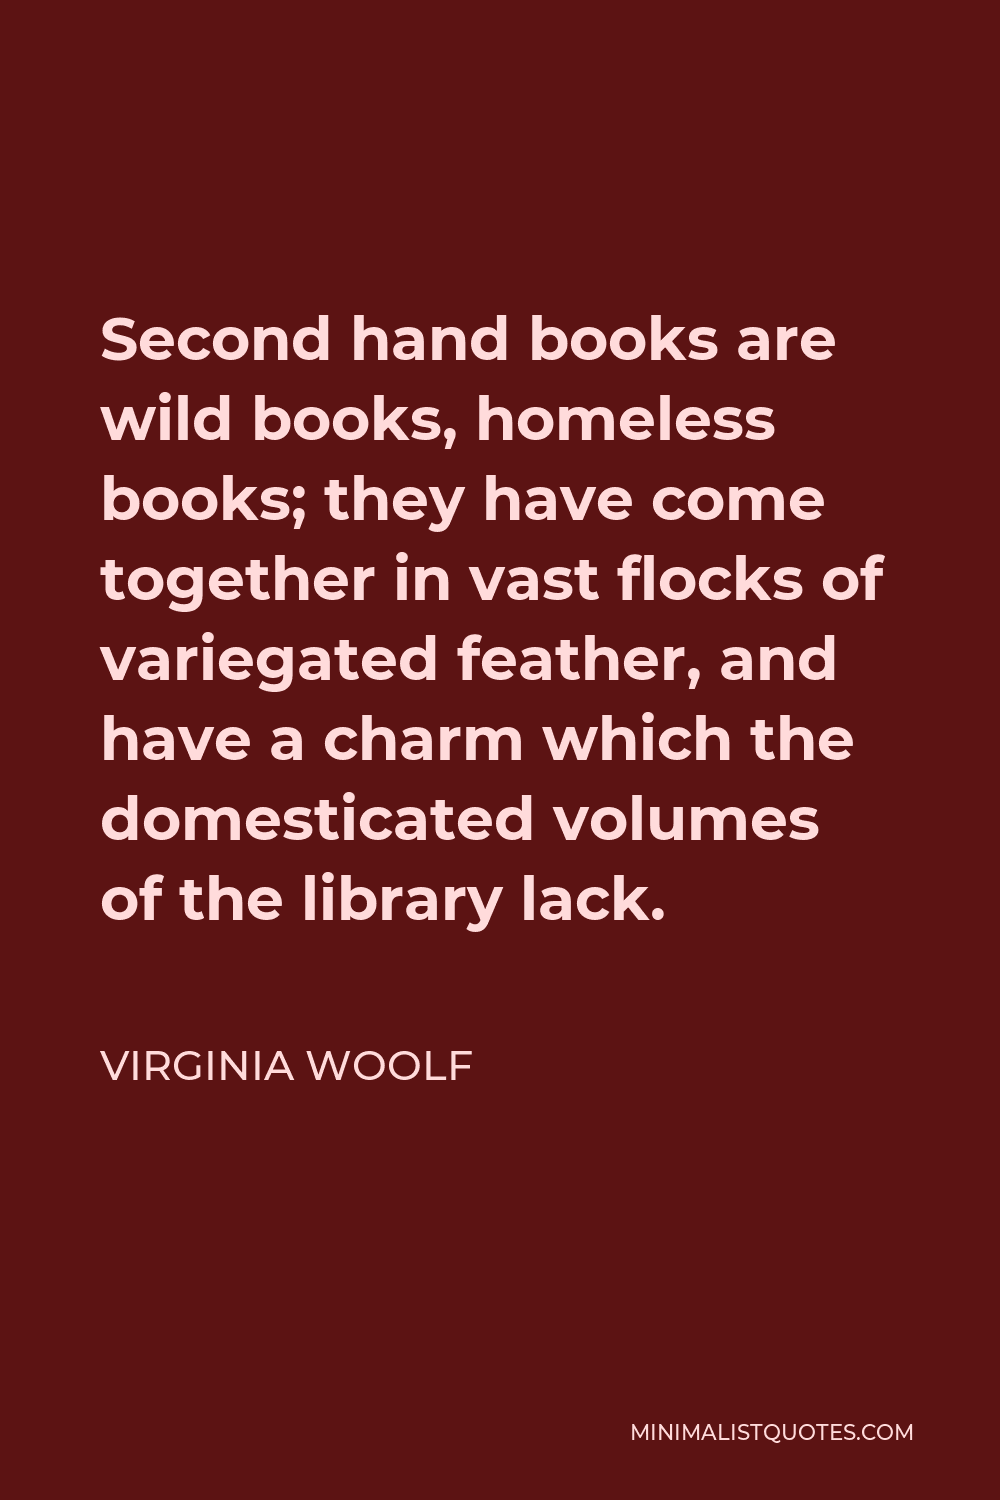 Virginia Woolf Quote - Second hand books are wild books, homeless books; they have come together in vast flocks of variegated feather, and have a charm which the domesticated volumes of the library lack.